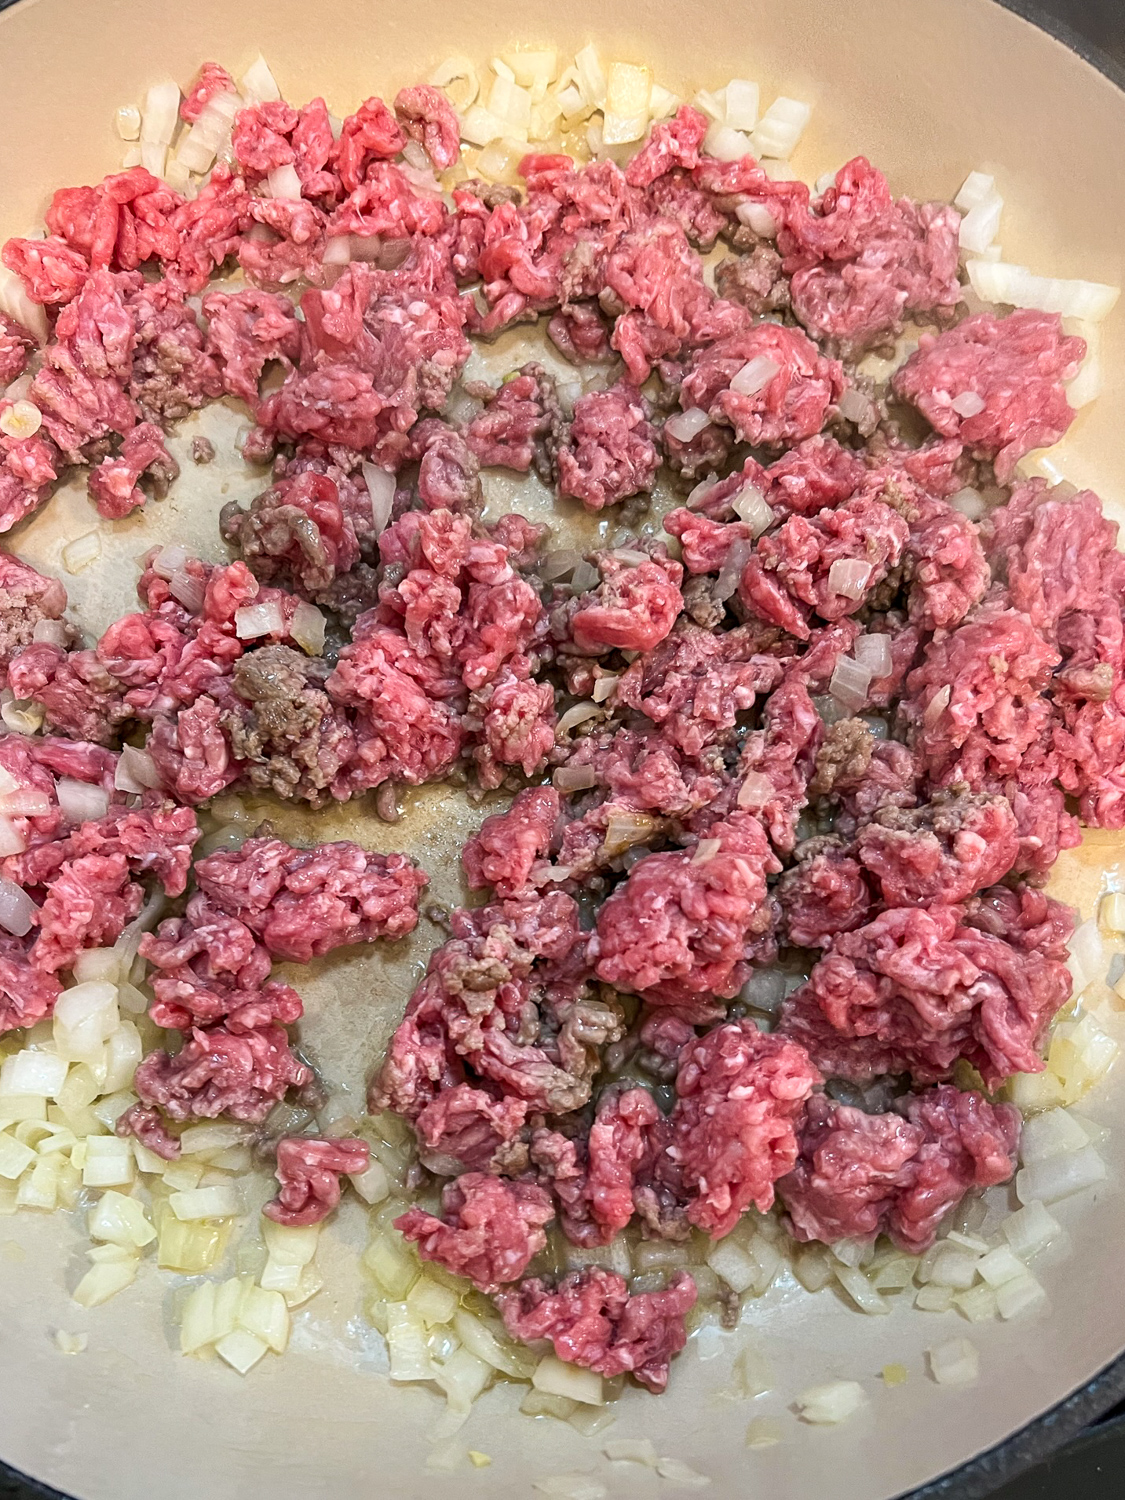 Ground beef and onions cooking in the skillet. 